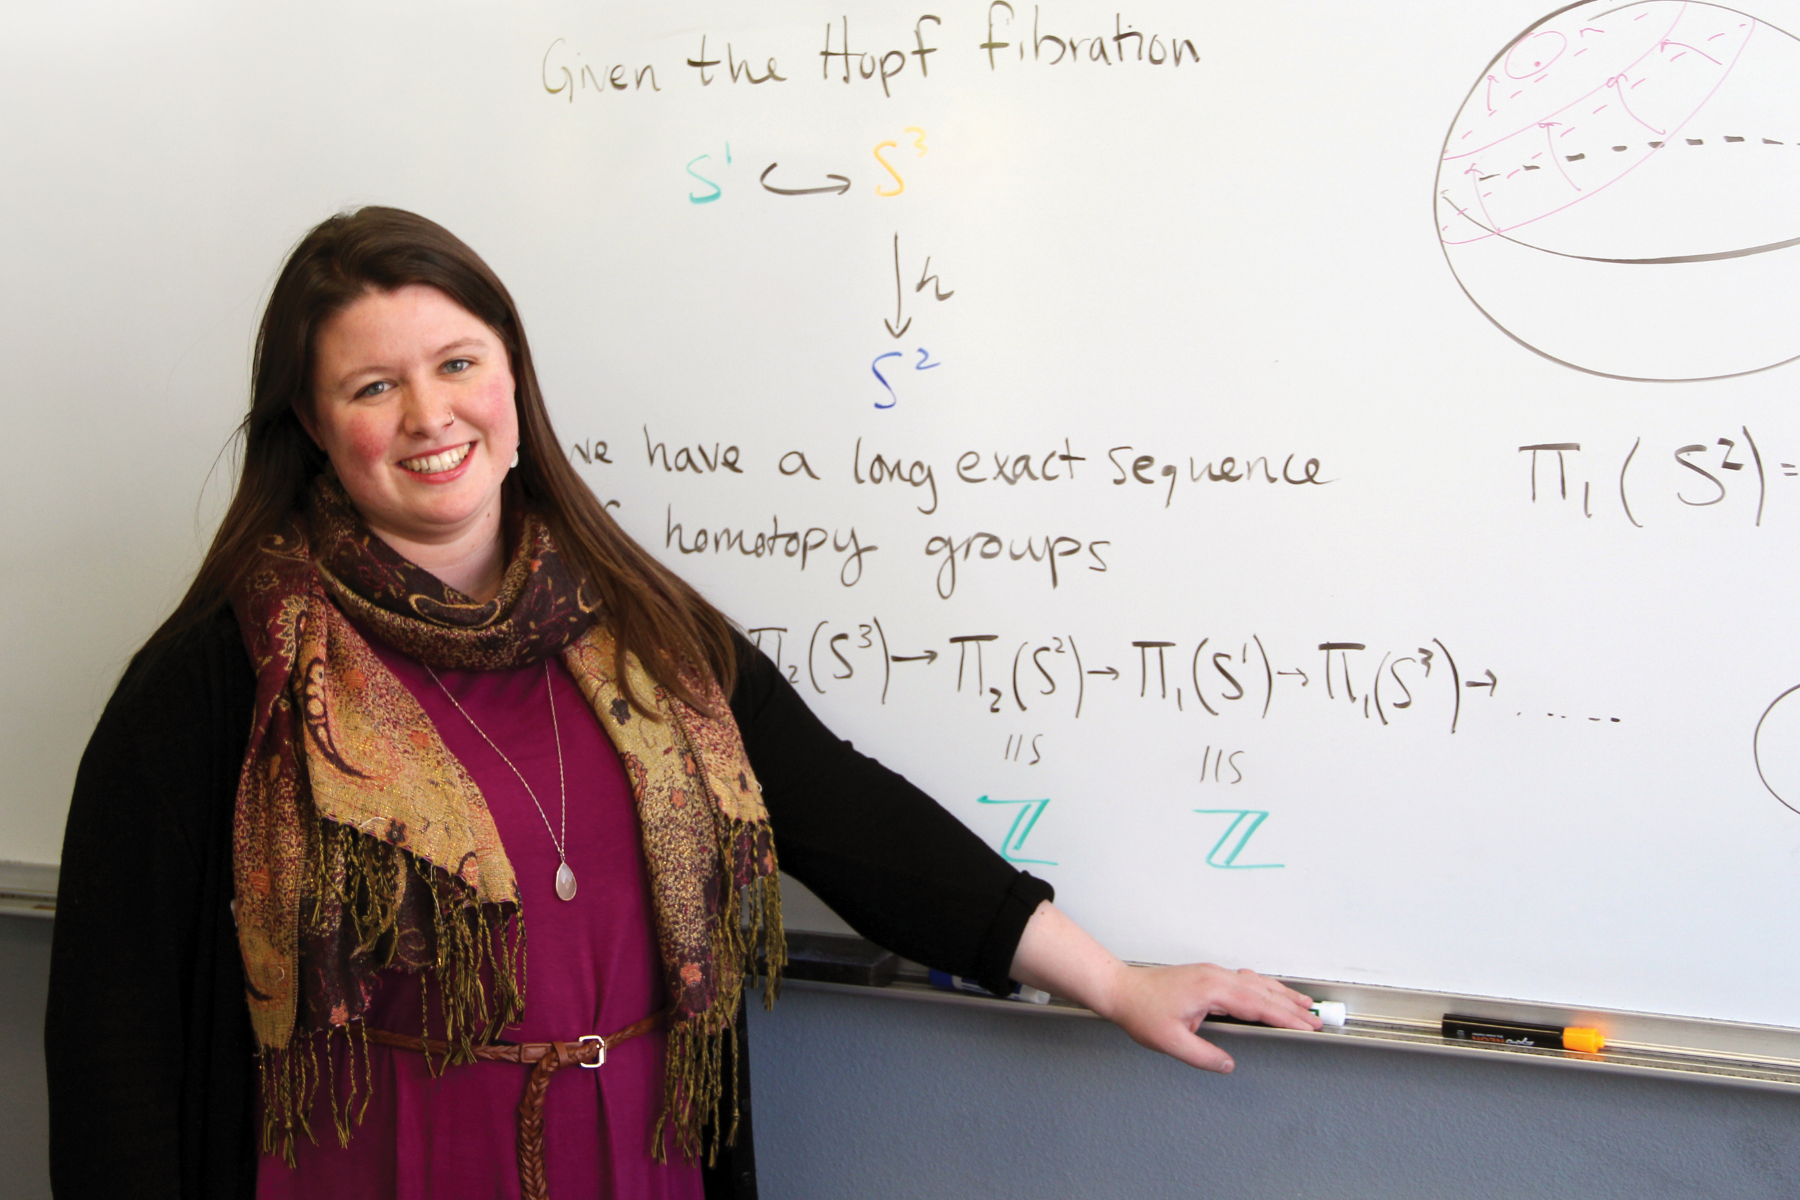 A woman standing in front of a whitebaord with math on it, wearing a burgundy dress, brown belt,